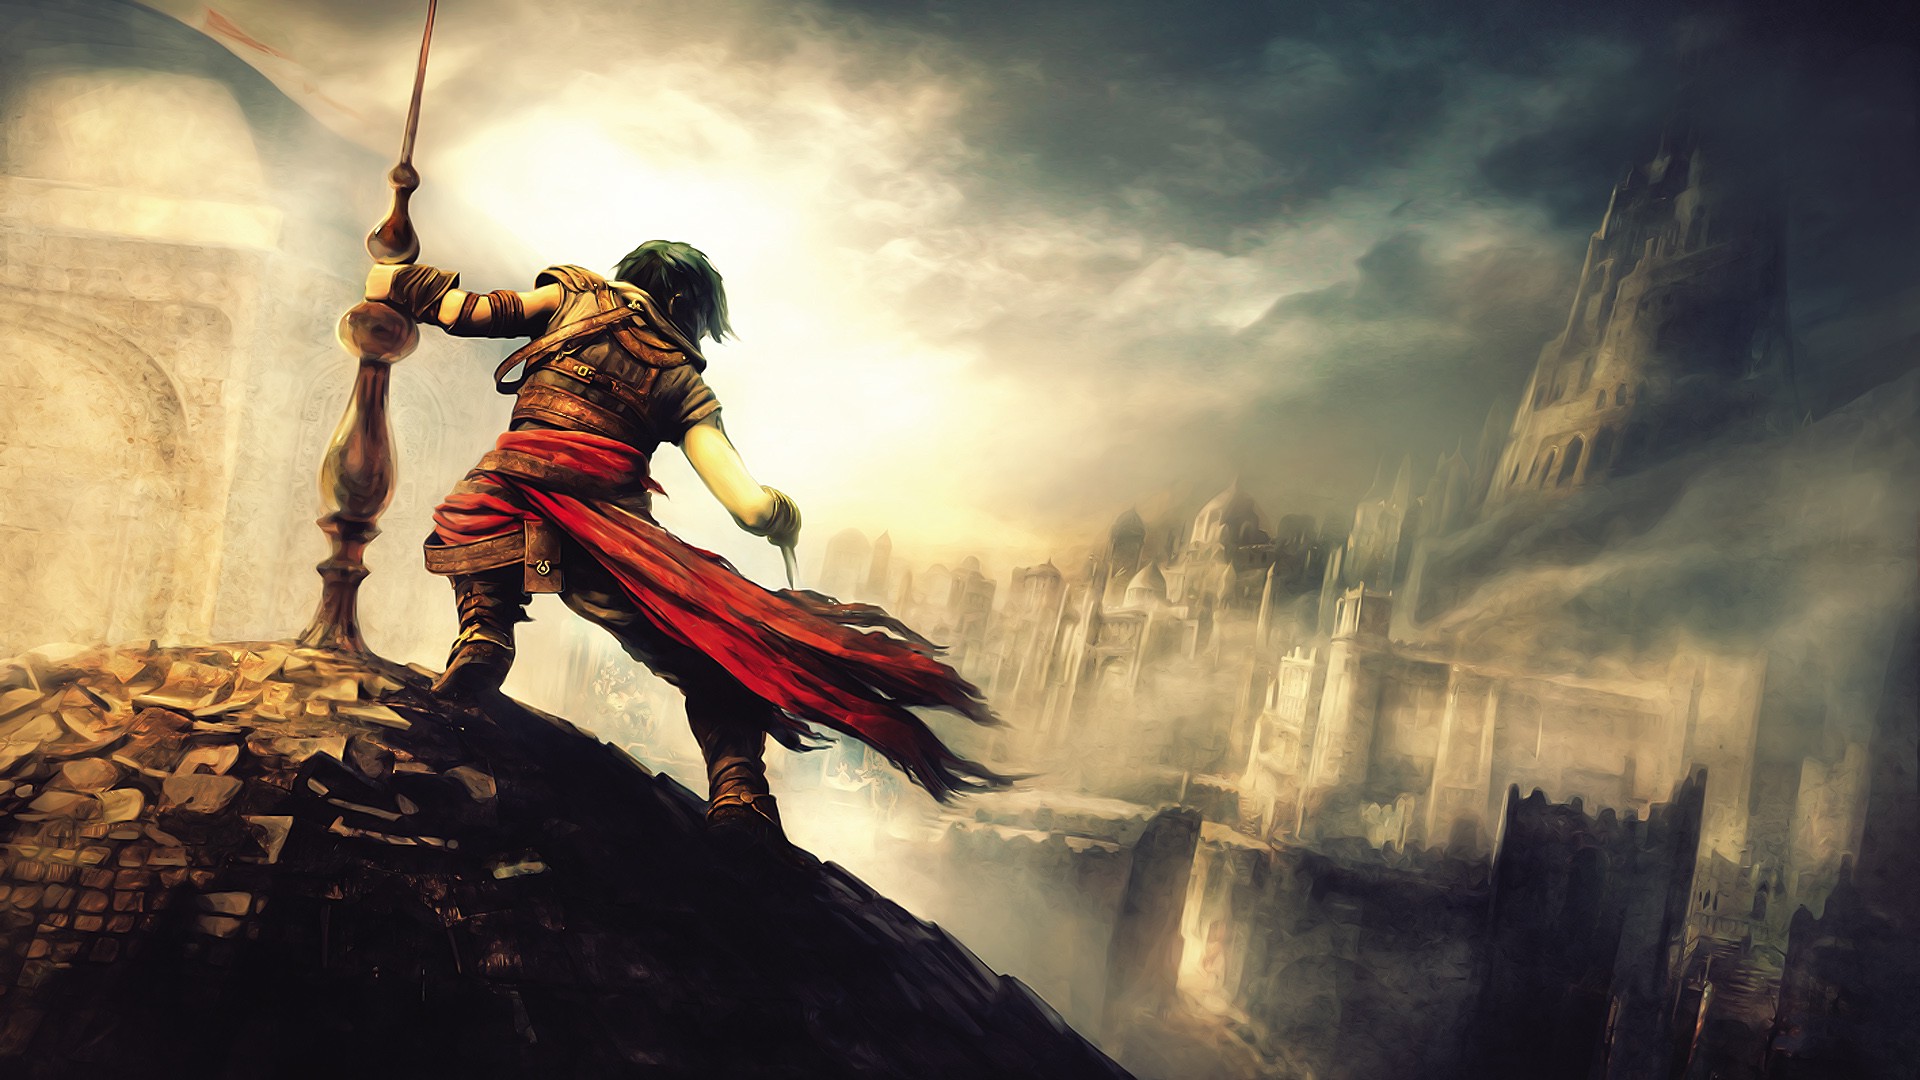 download Prince of Persia 2.5D